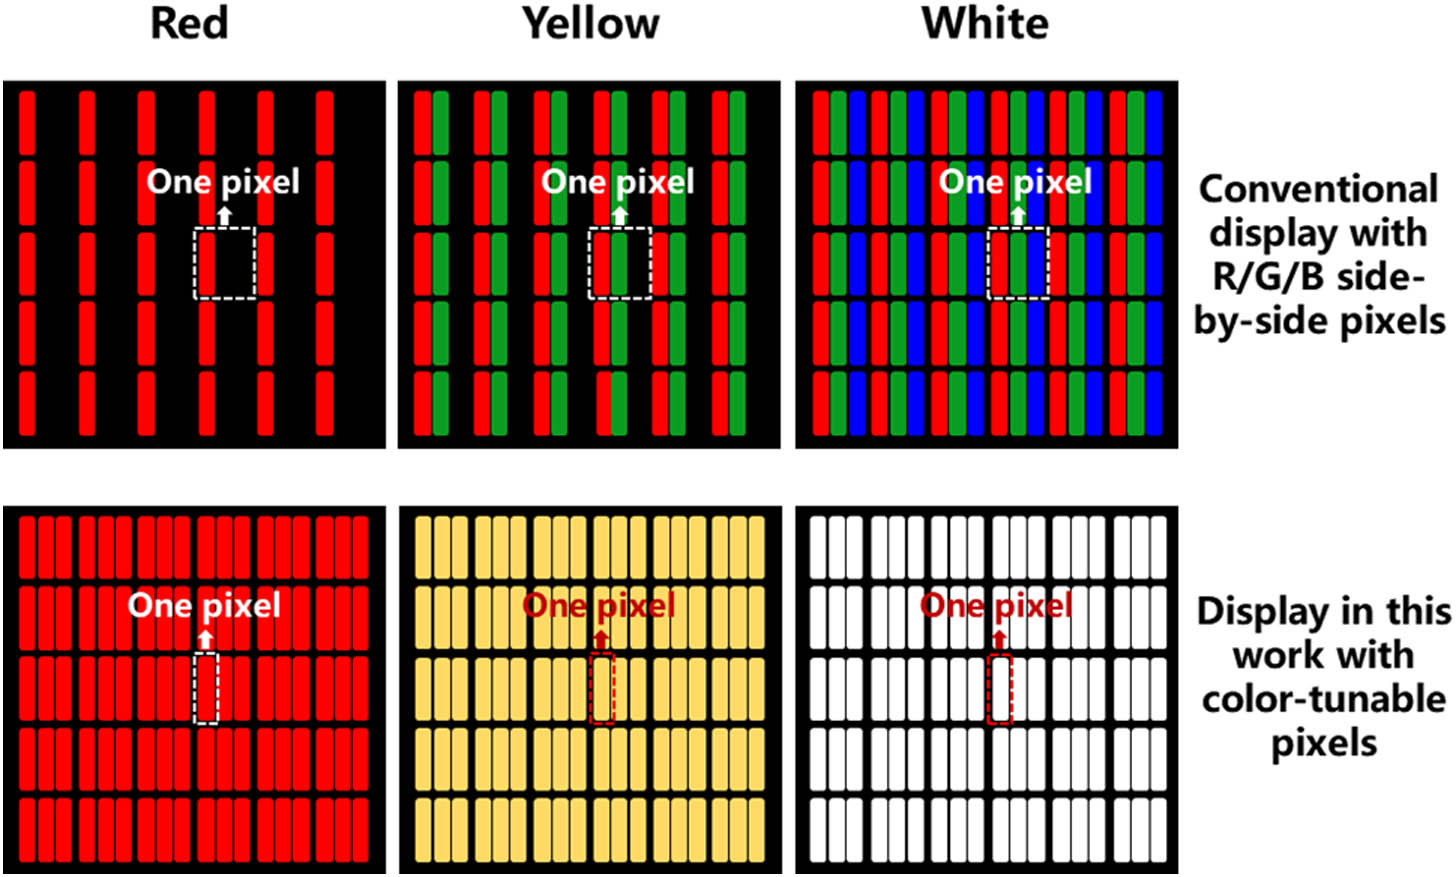 Pixel arrangement of the conventional display with R/G/B side-by-side pixels and display in this work with color-tunable pixels.